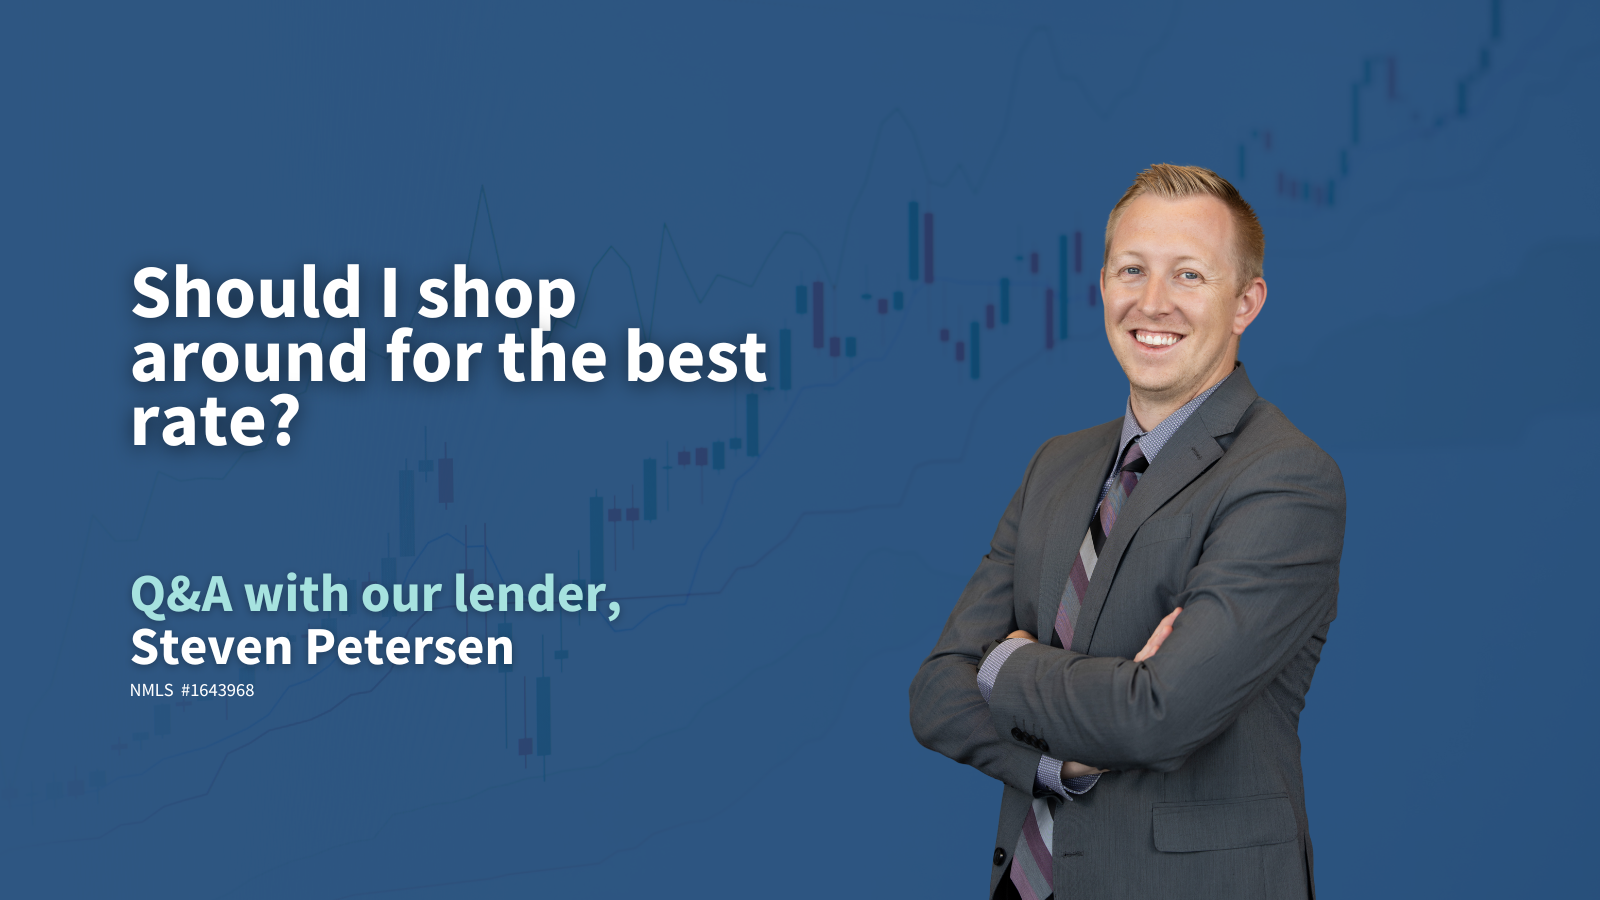 Should I shop around for the best rate? Q&A with Steven Petersen